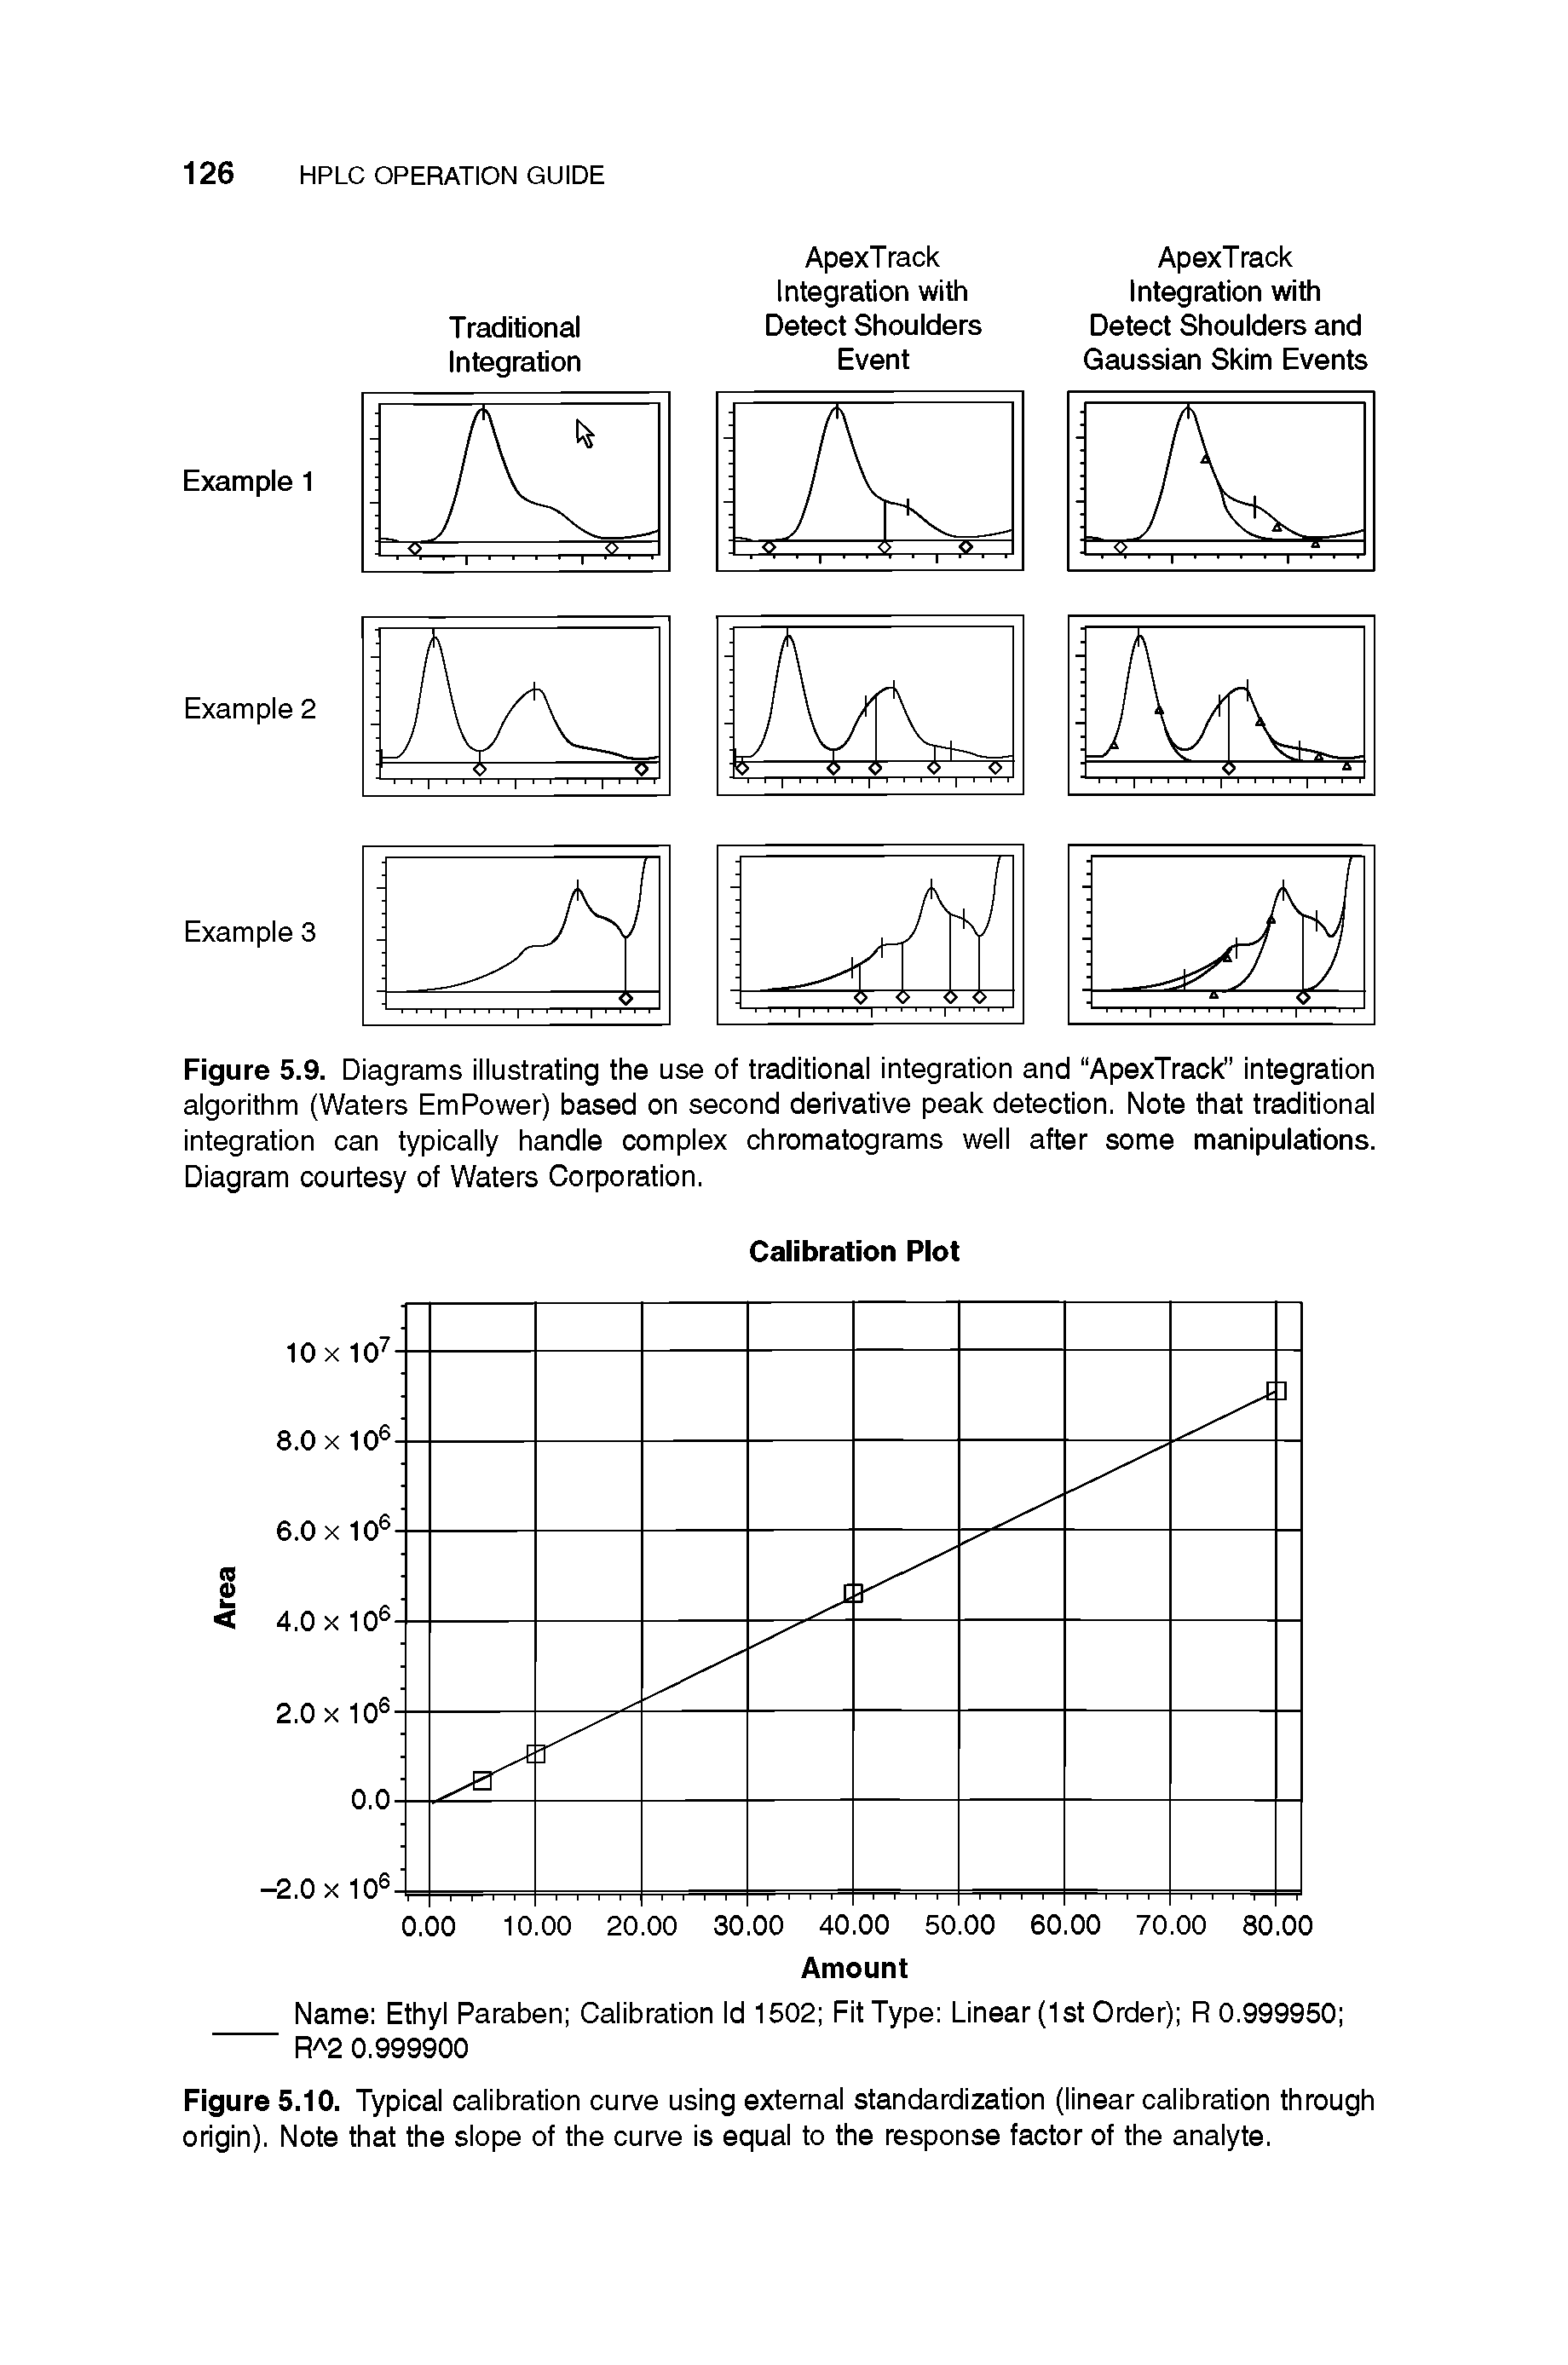 Figure 5.9. Diagrams illustrating the use of traditional integration and ApexTrack integration algorithm (Waters EmPower) based on second derivative peak detection. Note that traditional integration can typically handle complex chromatograms well after some manipulations. Diagram courtesy of Waters Corporation.